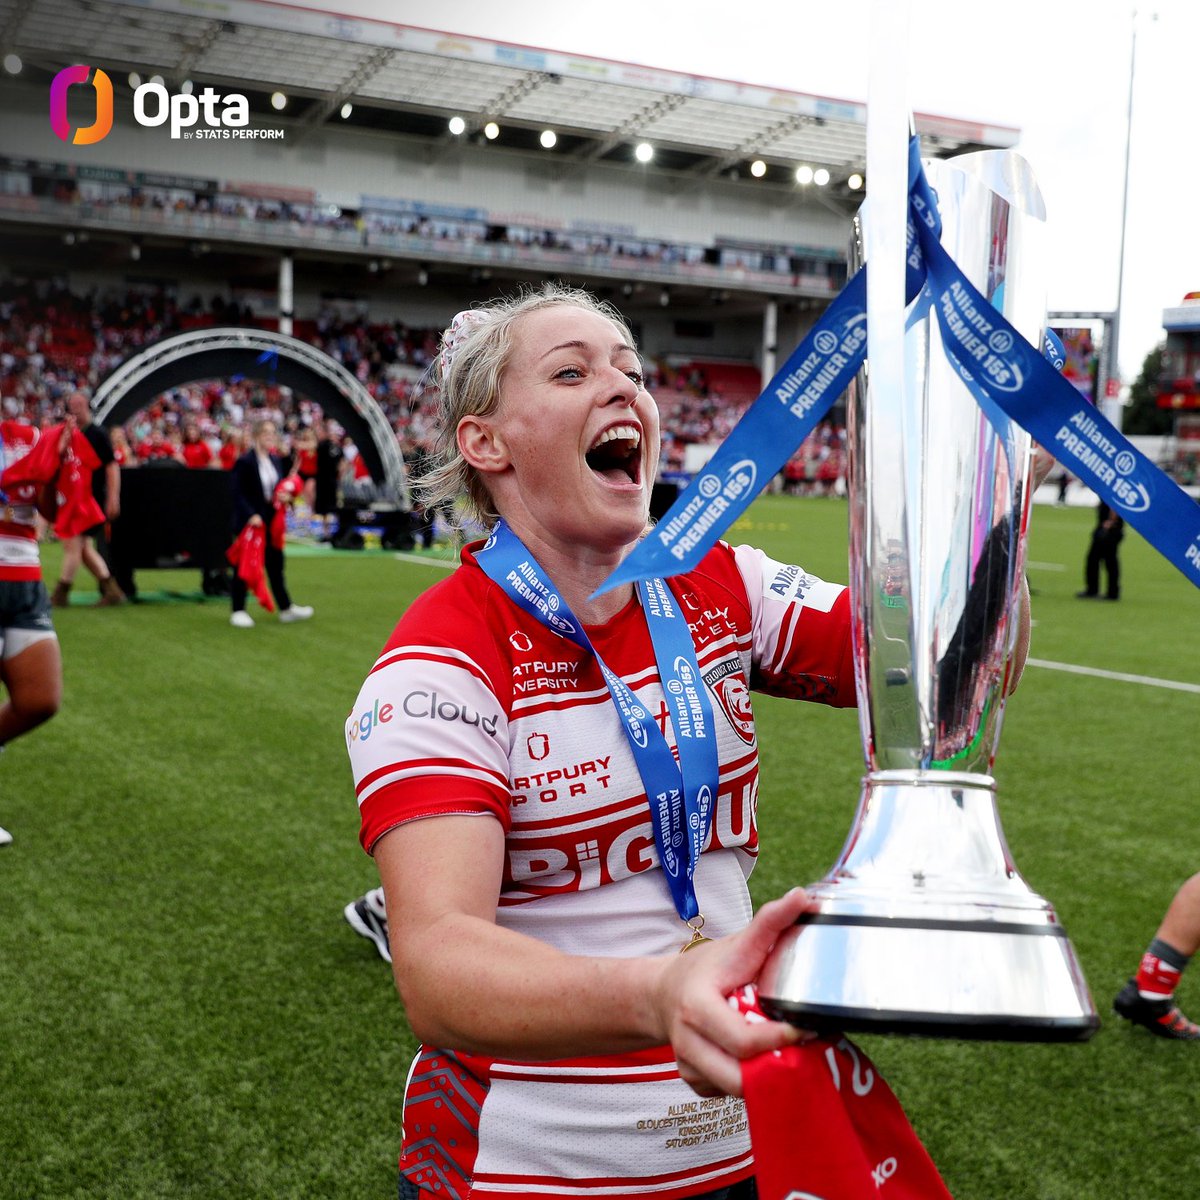 28 - Natasha Hunt assisted 28 tries in the @Premier15s this season, no other player assisted more than 12. Unrivalled. Hunt's 28 try assists by round: 1 - 2⃣ 2 - ❌ 4 - 1⃣ 5 - 5⃣ 6 - 3⃣ 7 - 1⃣ 8 - 3⃣ 9 - 2⃣ 10 - ❌ 12 -2⃣ 13 - ❌ 14 - 2⃣ 15 - 2⃣ 16 - 3⃣ 17 - ❌ SF - ❌ F - 2⃣